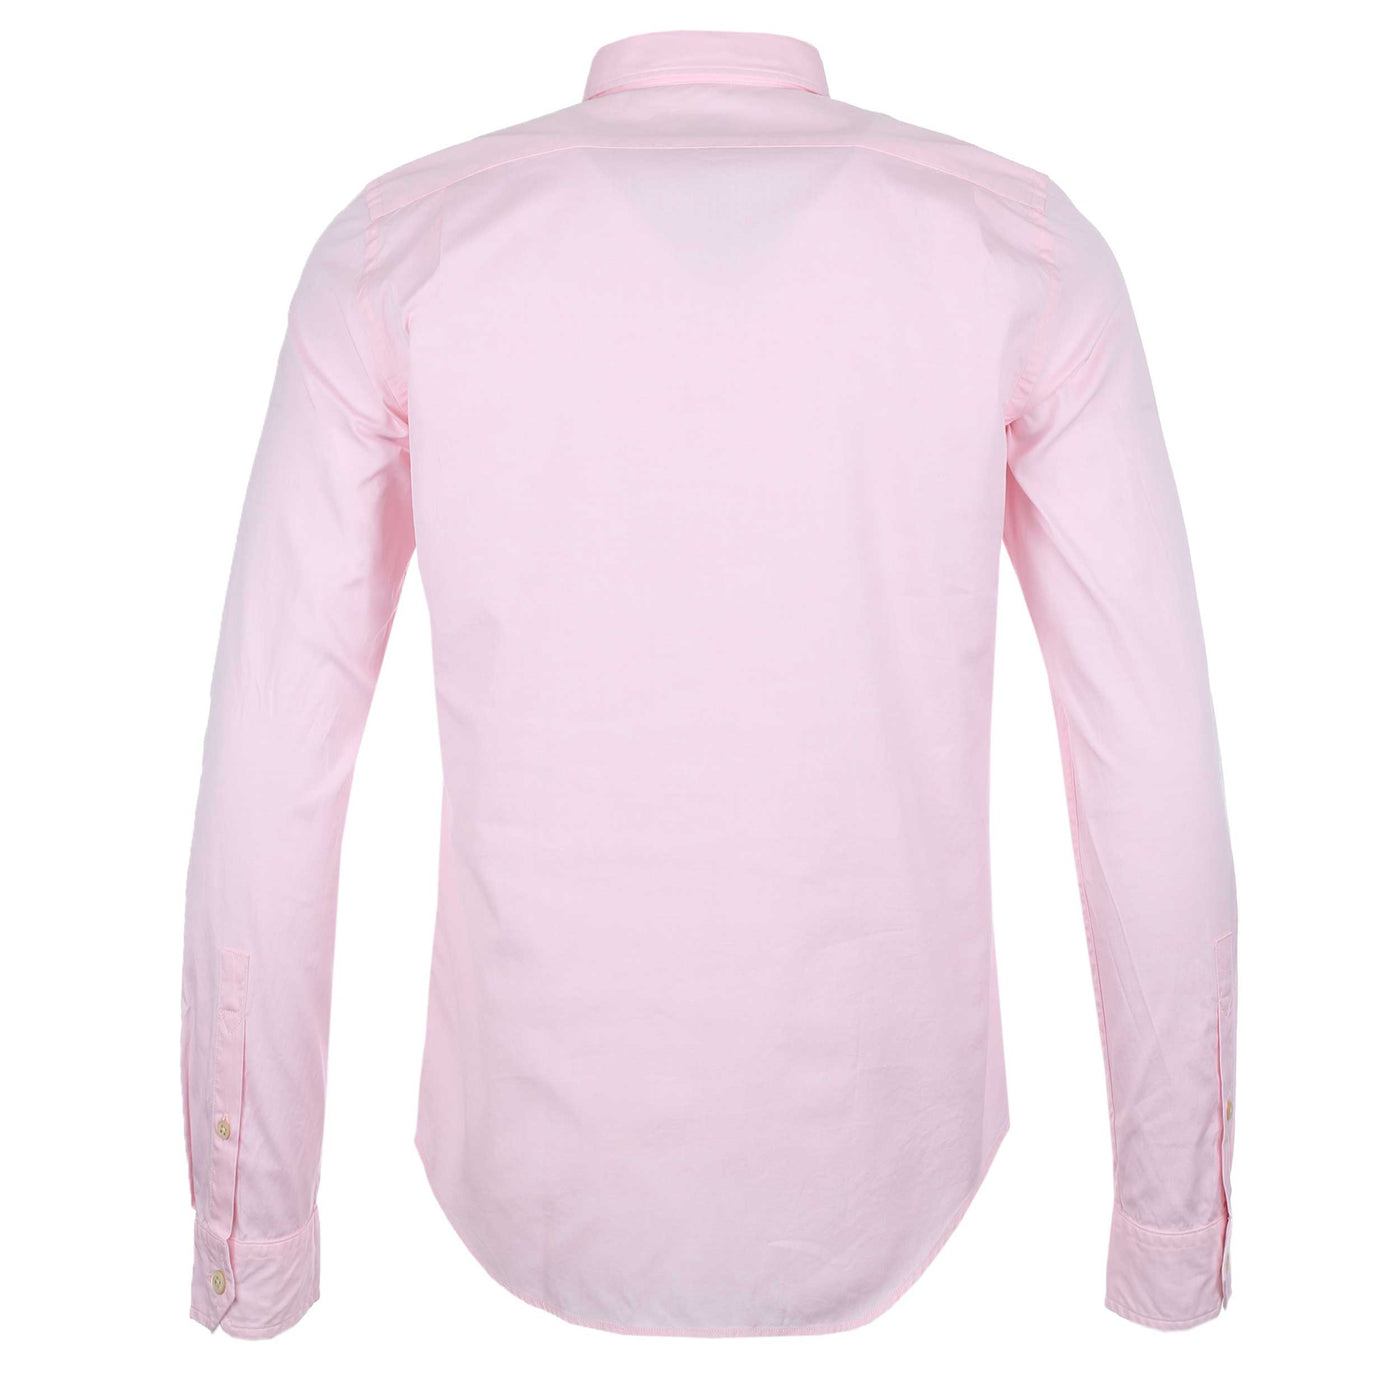 Paul Smith Zebra Badge Button Down Shirt in Pink